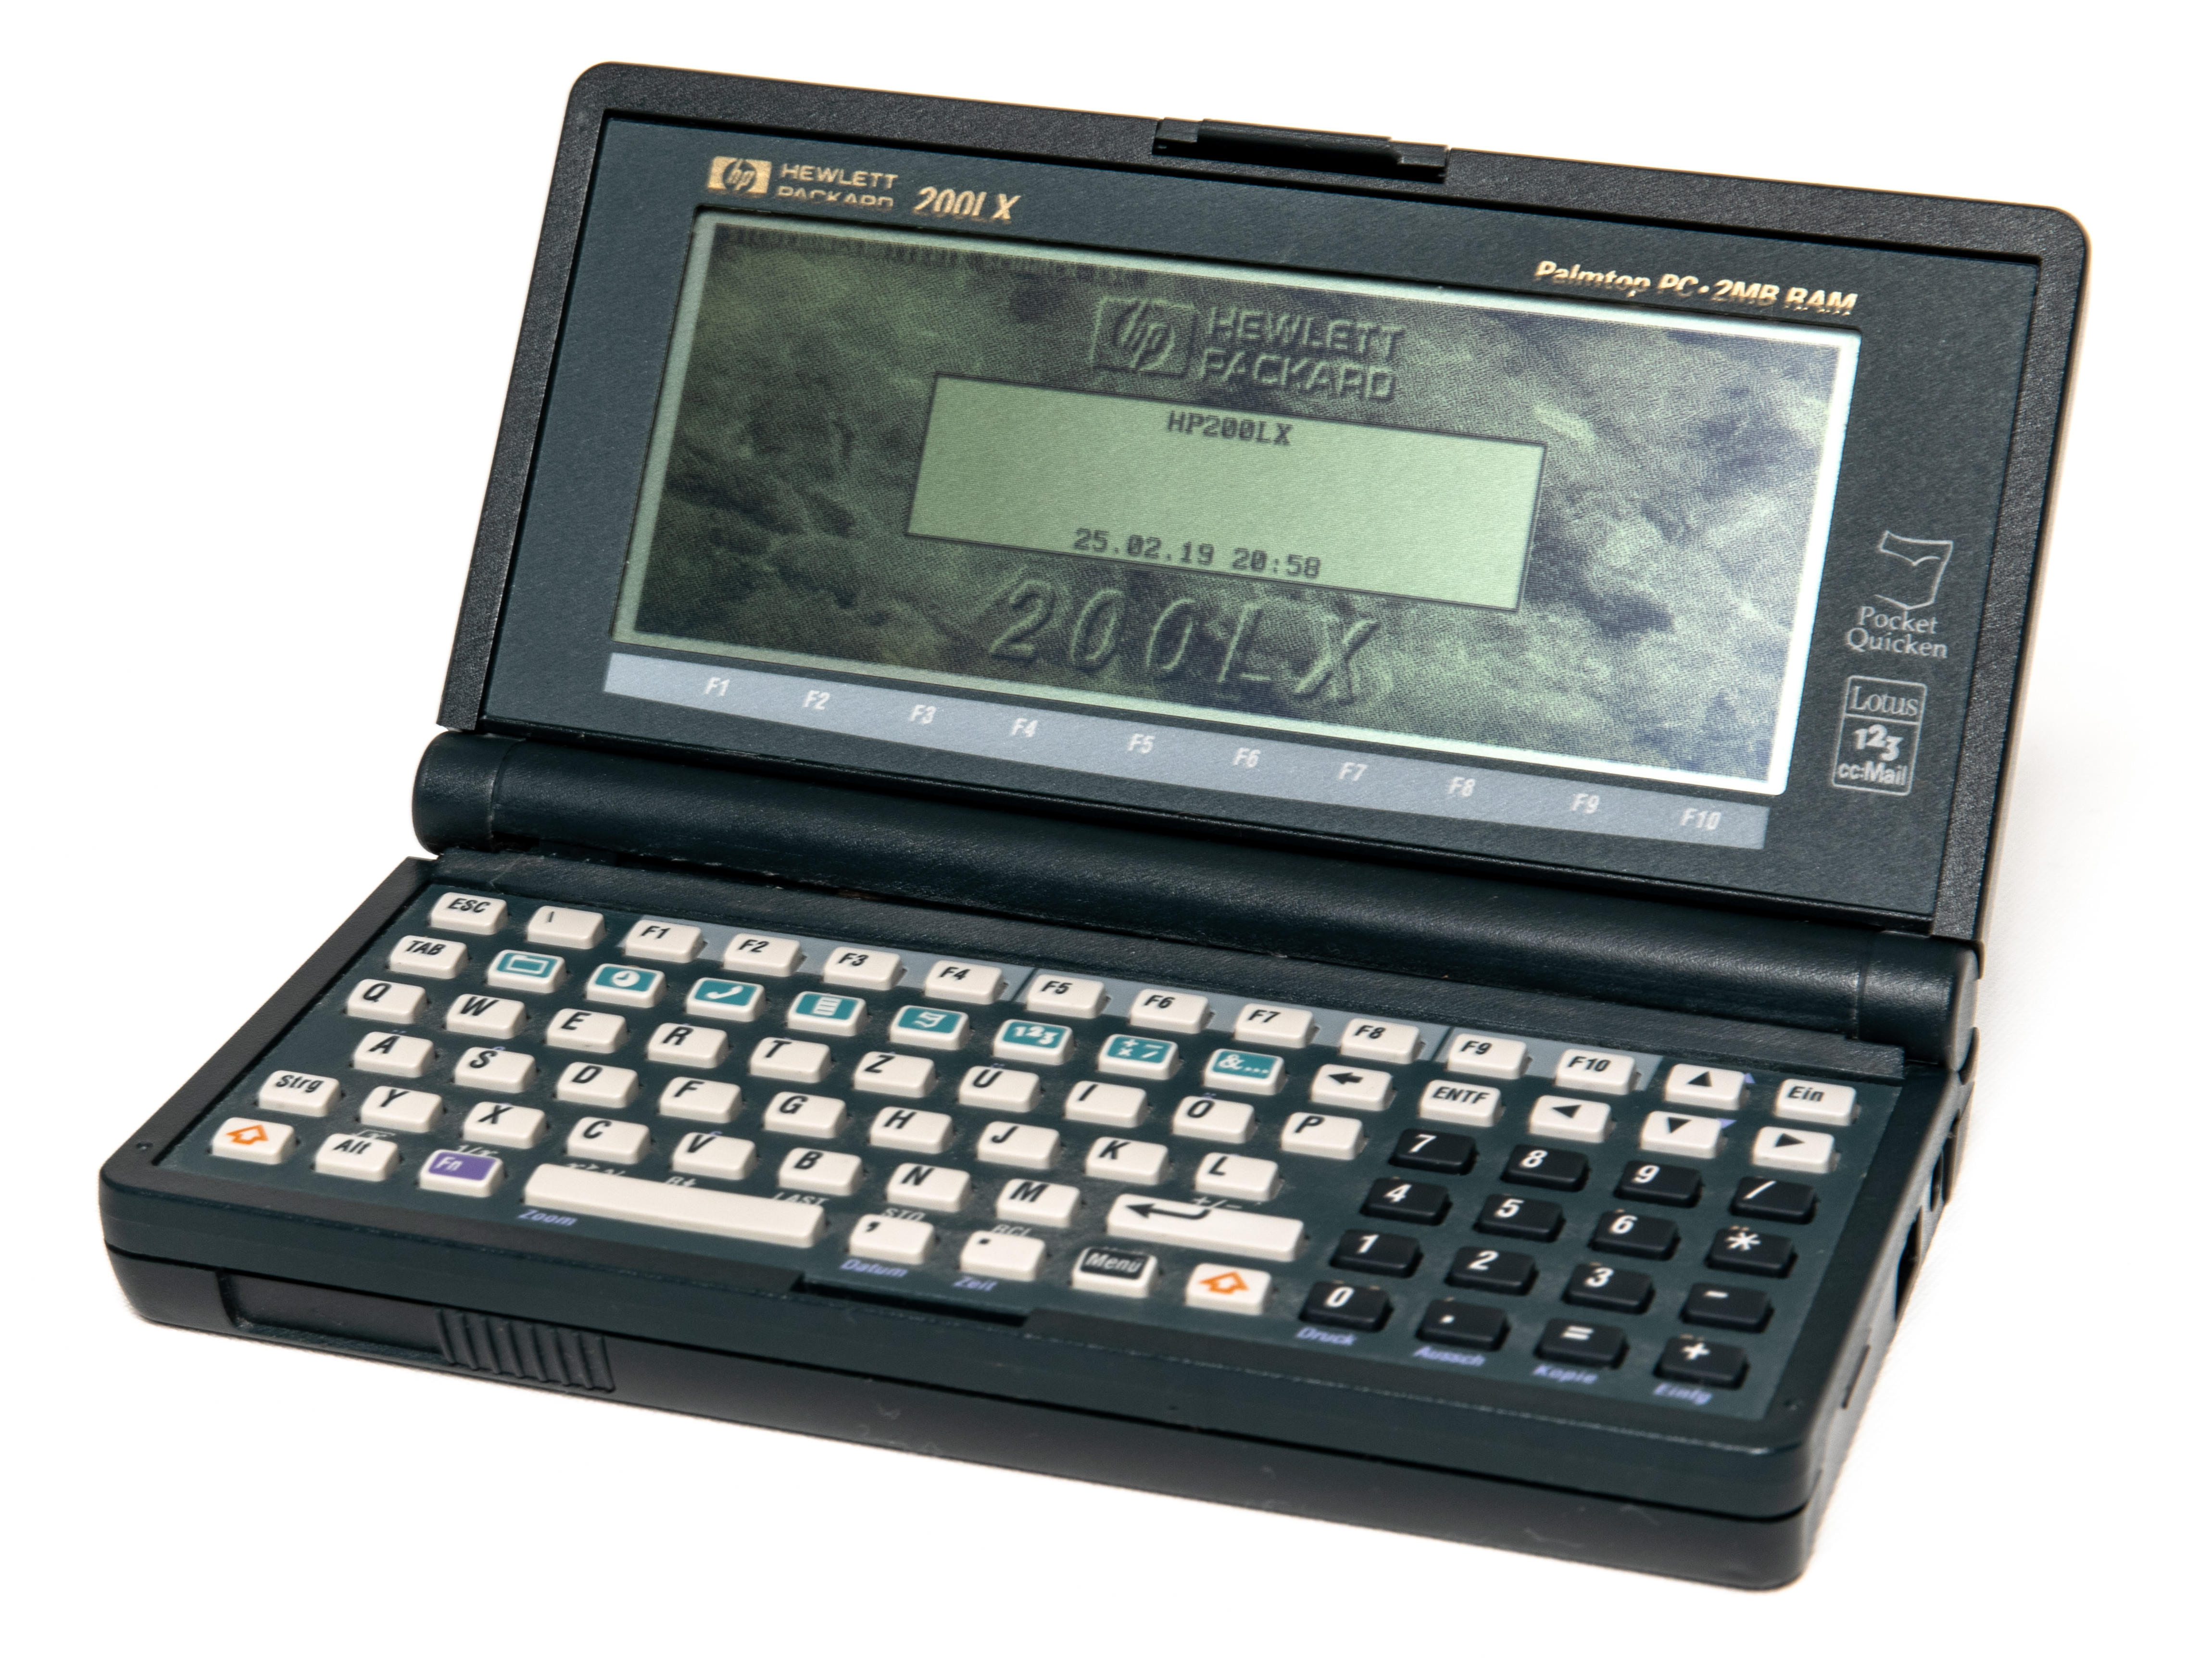 HP 200LX connectivity pack 日本語ガイド付き　起動可能PC/タブレット